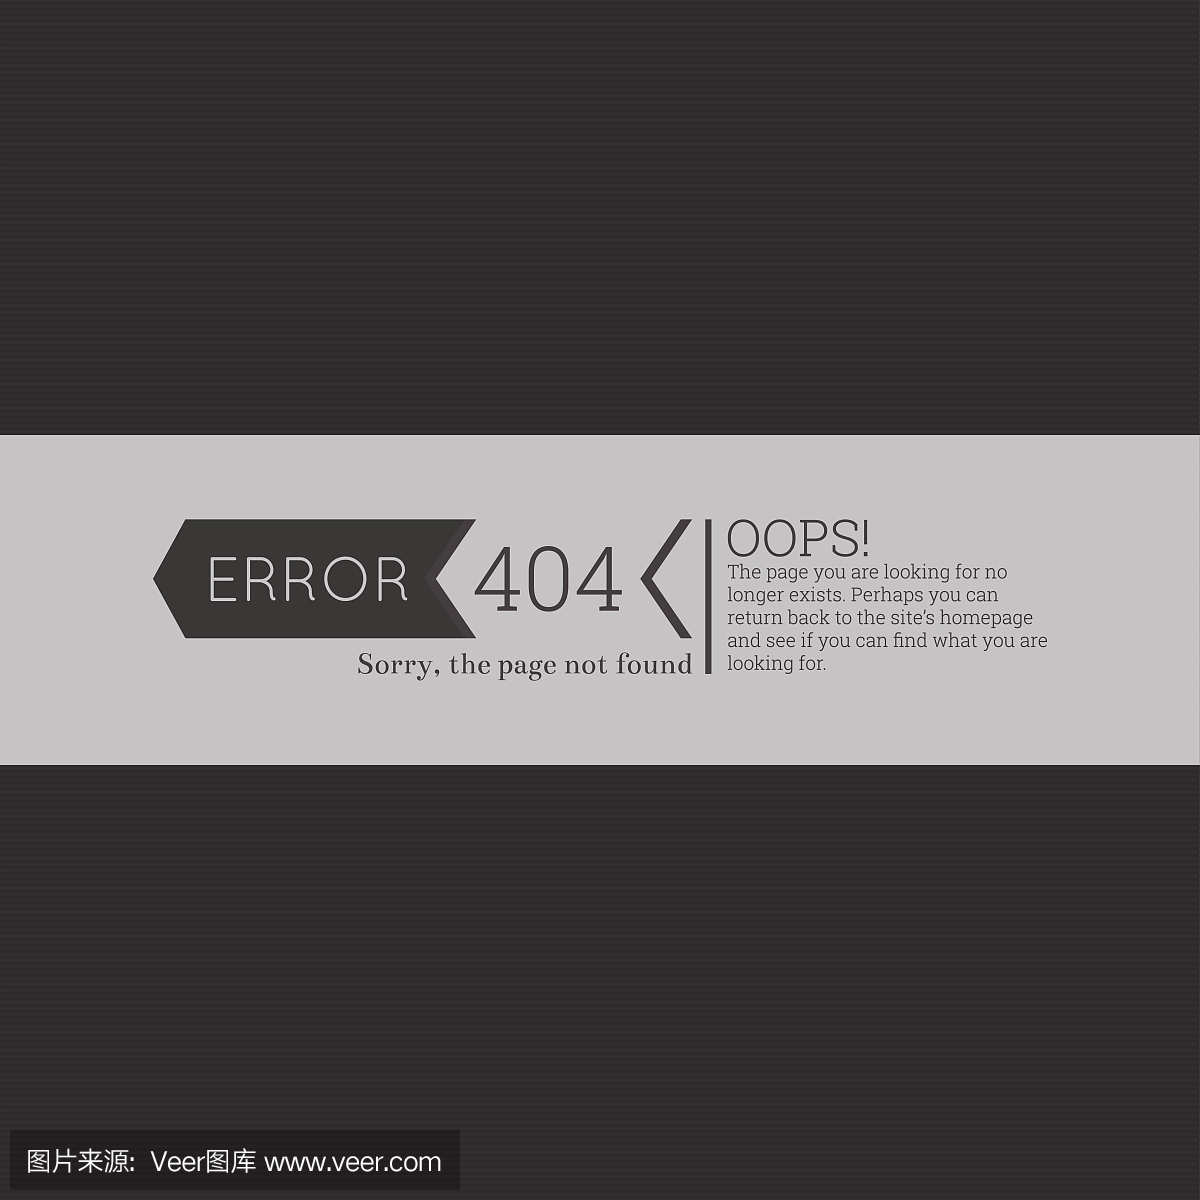 Oops. 404 error. Sorry, page not found.